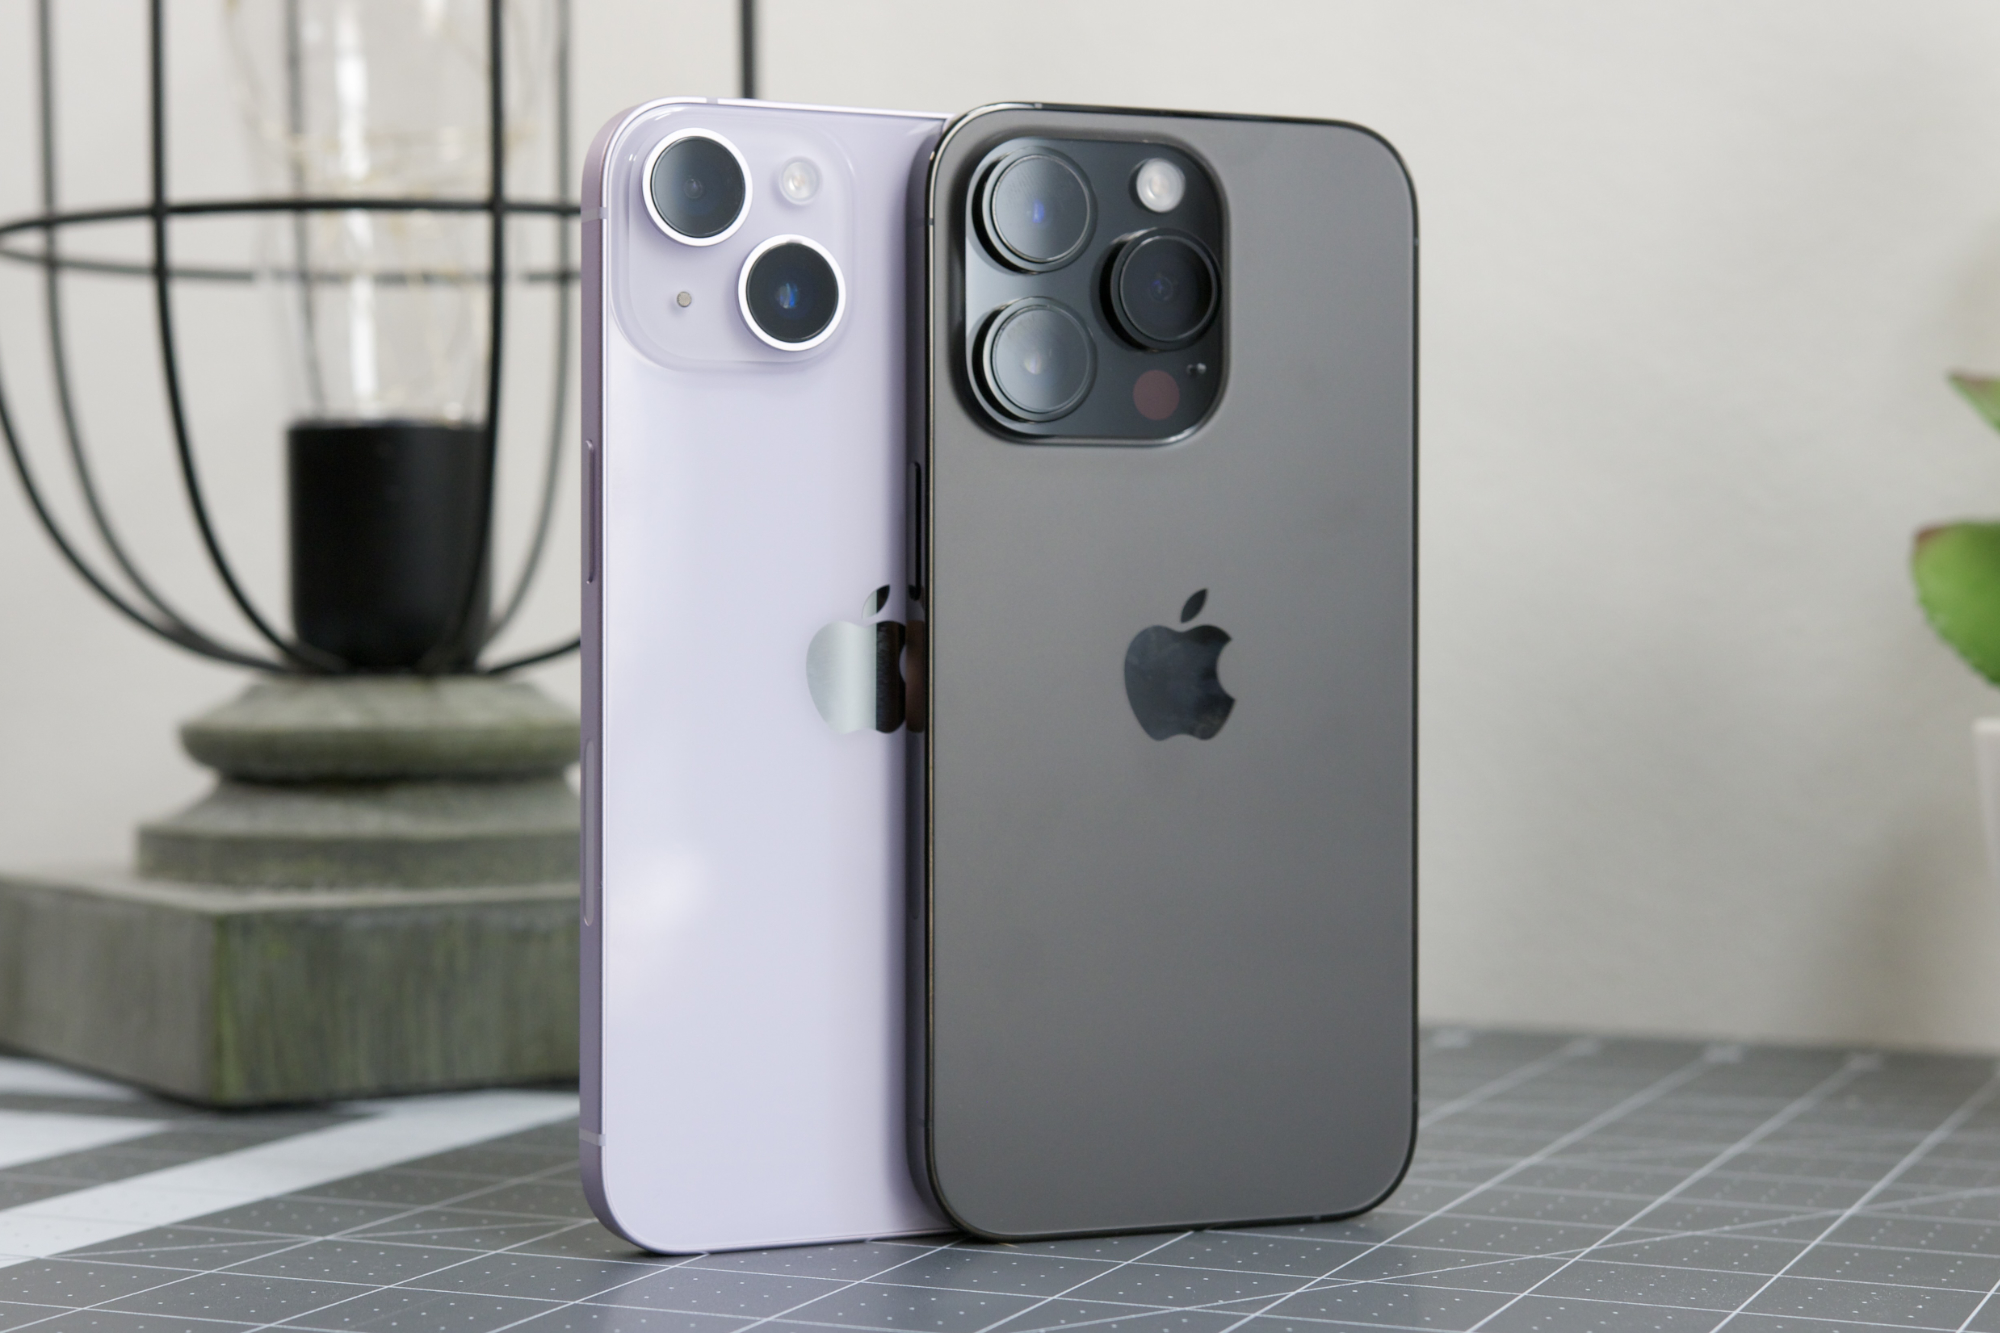 Does iPhone 14 have 3 cameras?